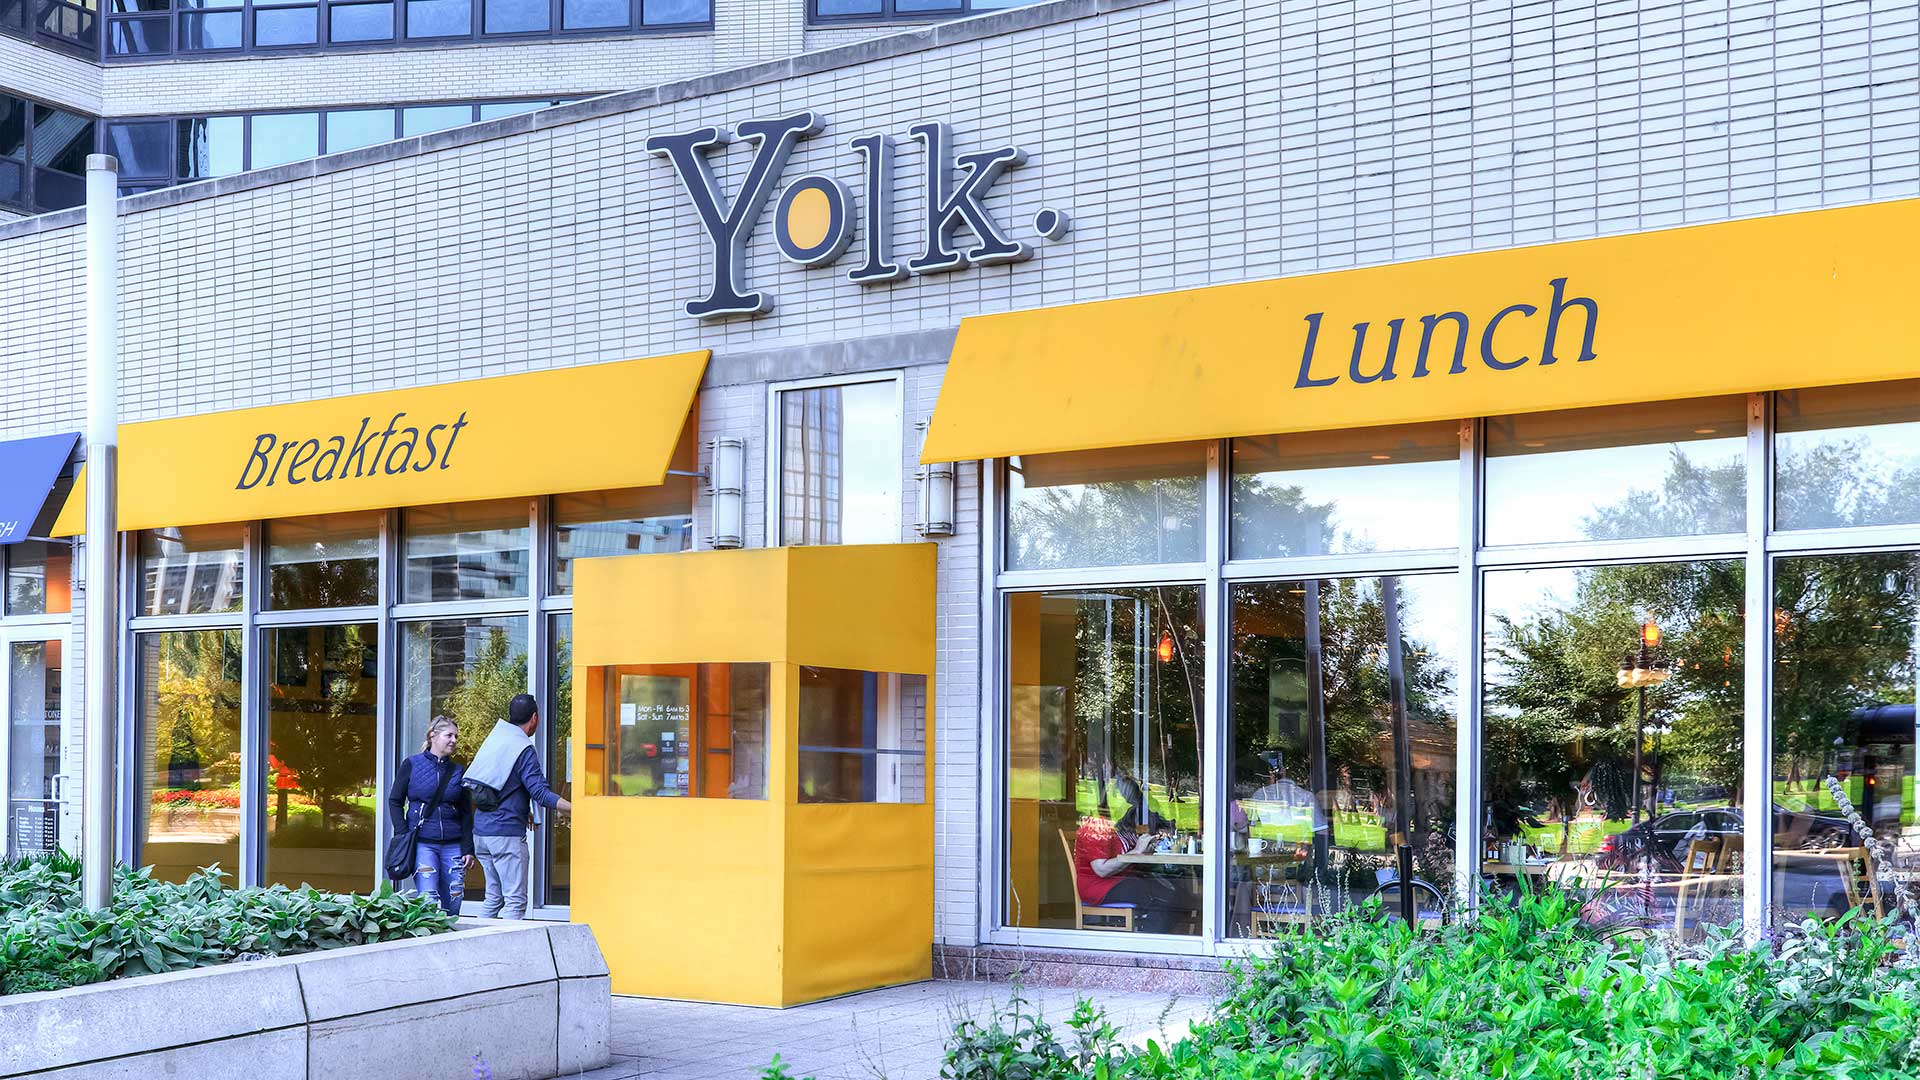 The storefront of Yolk restaurant located at Eleven Thirty. Yellow awnings hang over the windows.